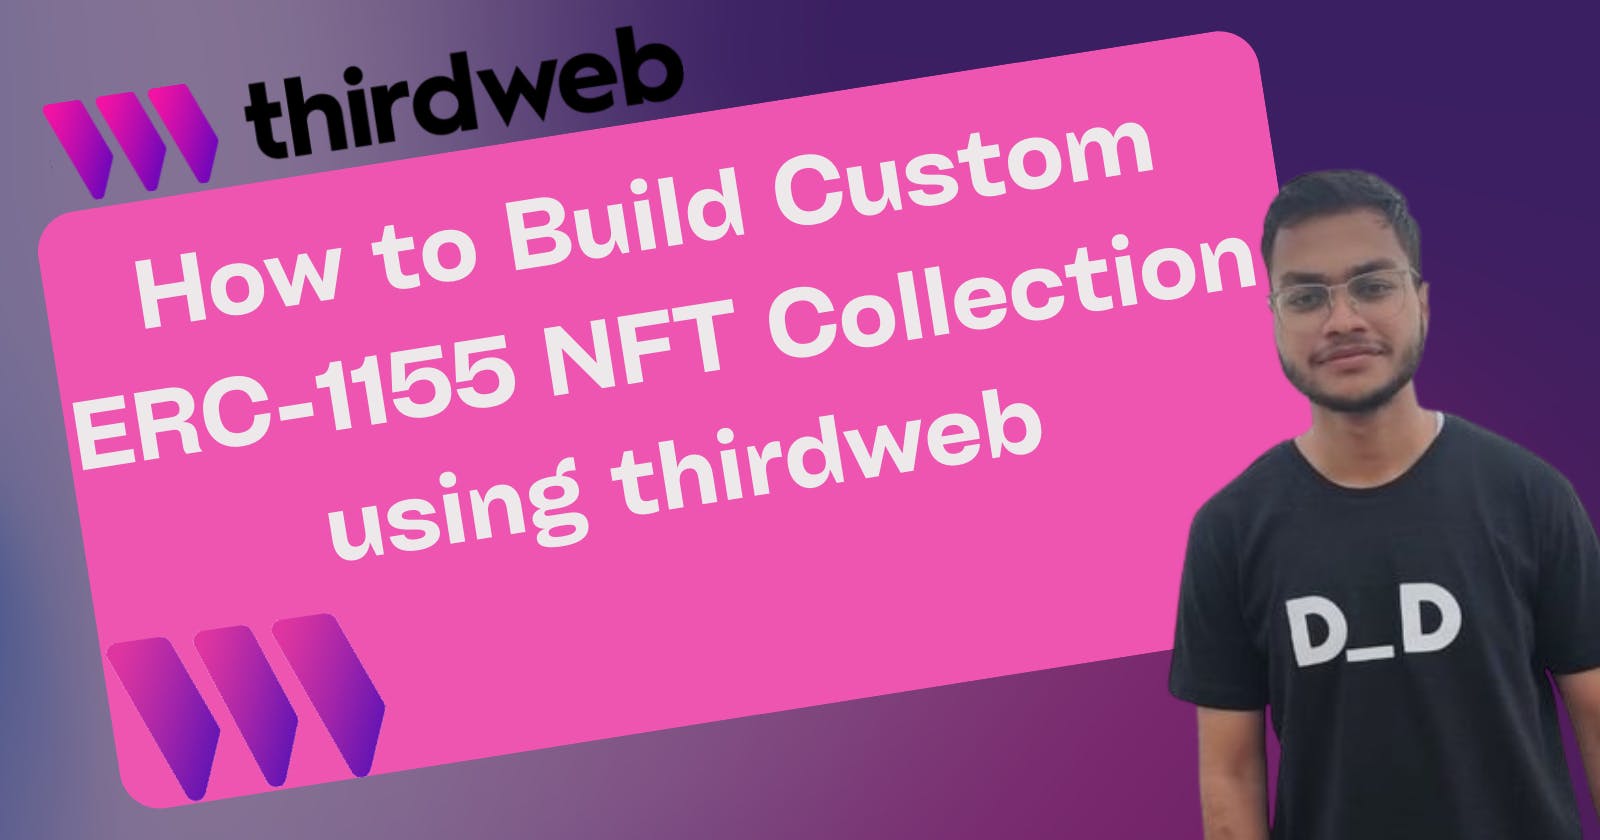 How to Build Custom ERC-1155 NFT Collections Using Thirdweb